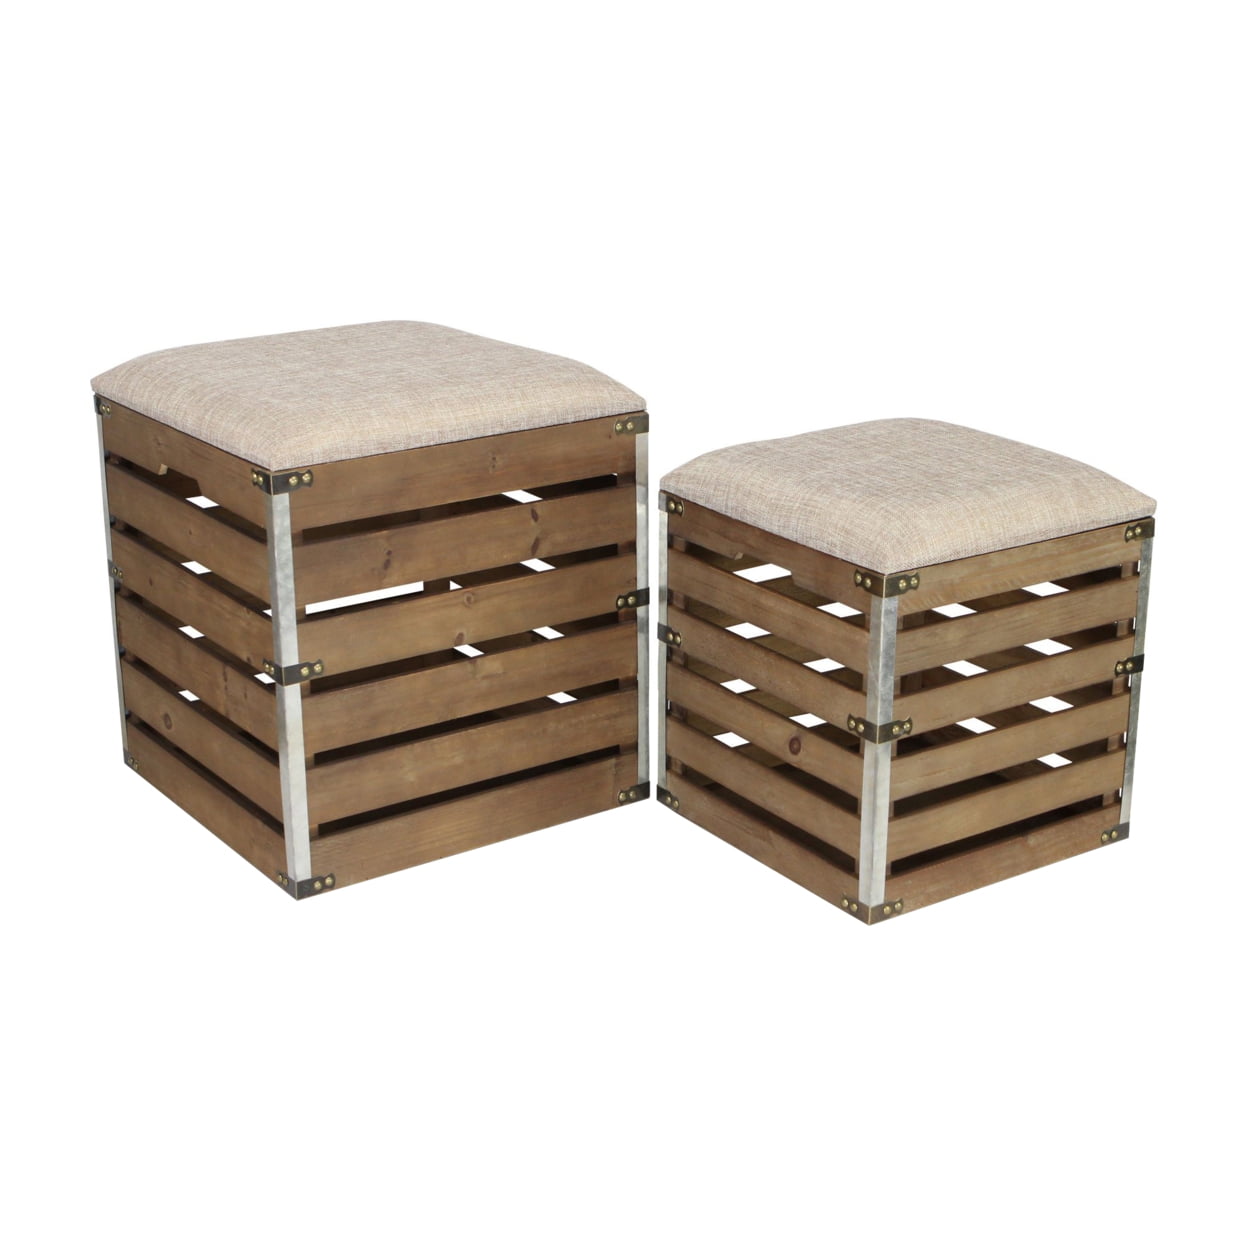 H2H Square Wood Slat Storage Bench with Metal Accent & Cushioned Lid - Set of 2